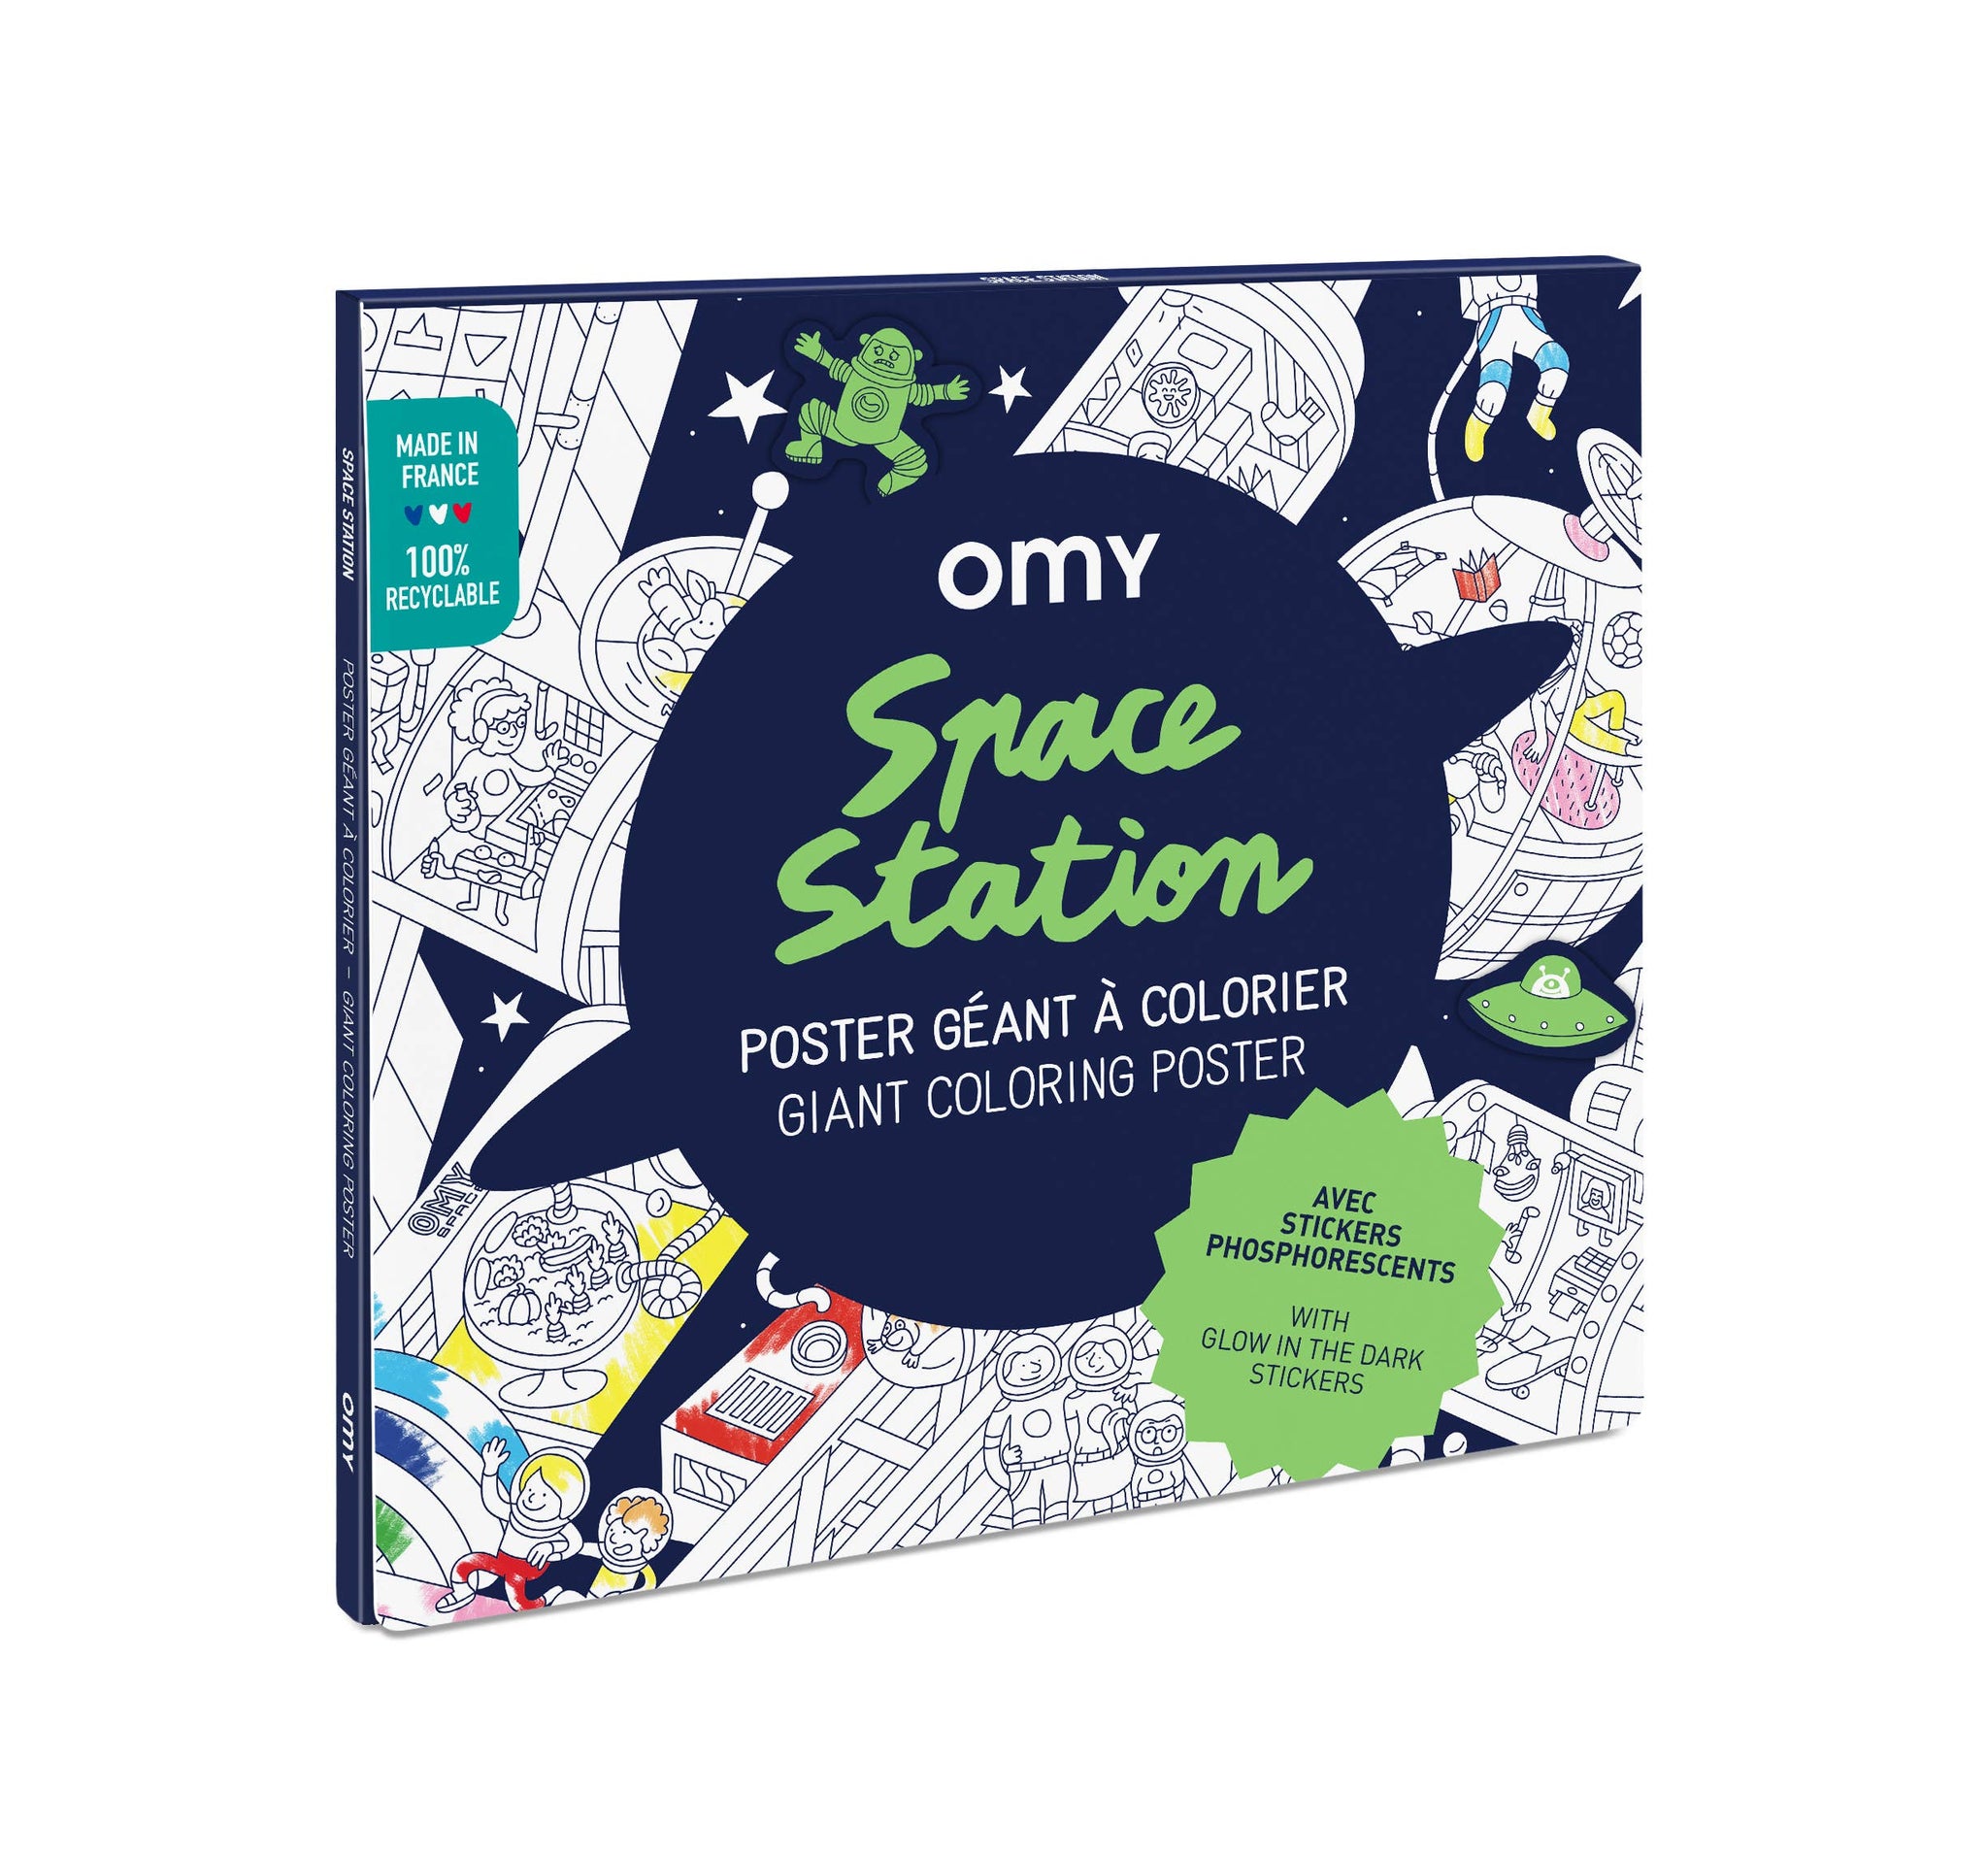 "Space Station" Giant Coloring Poster & Stickers